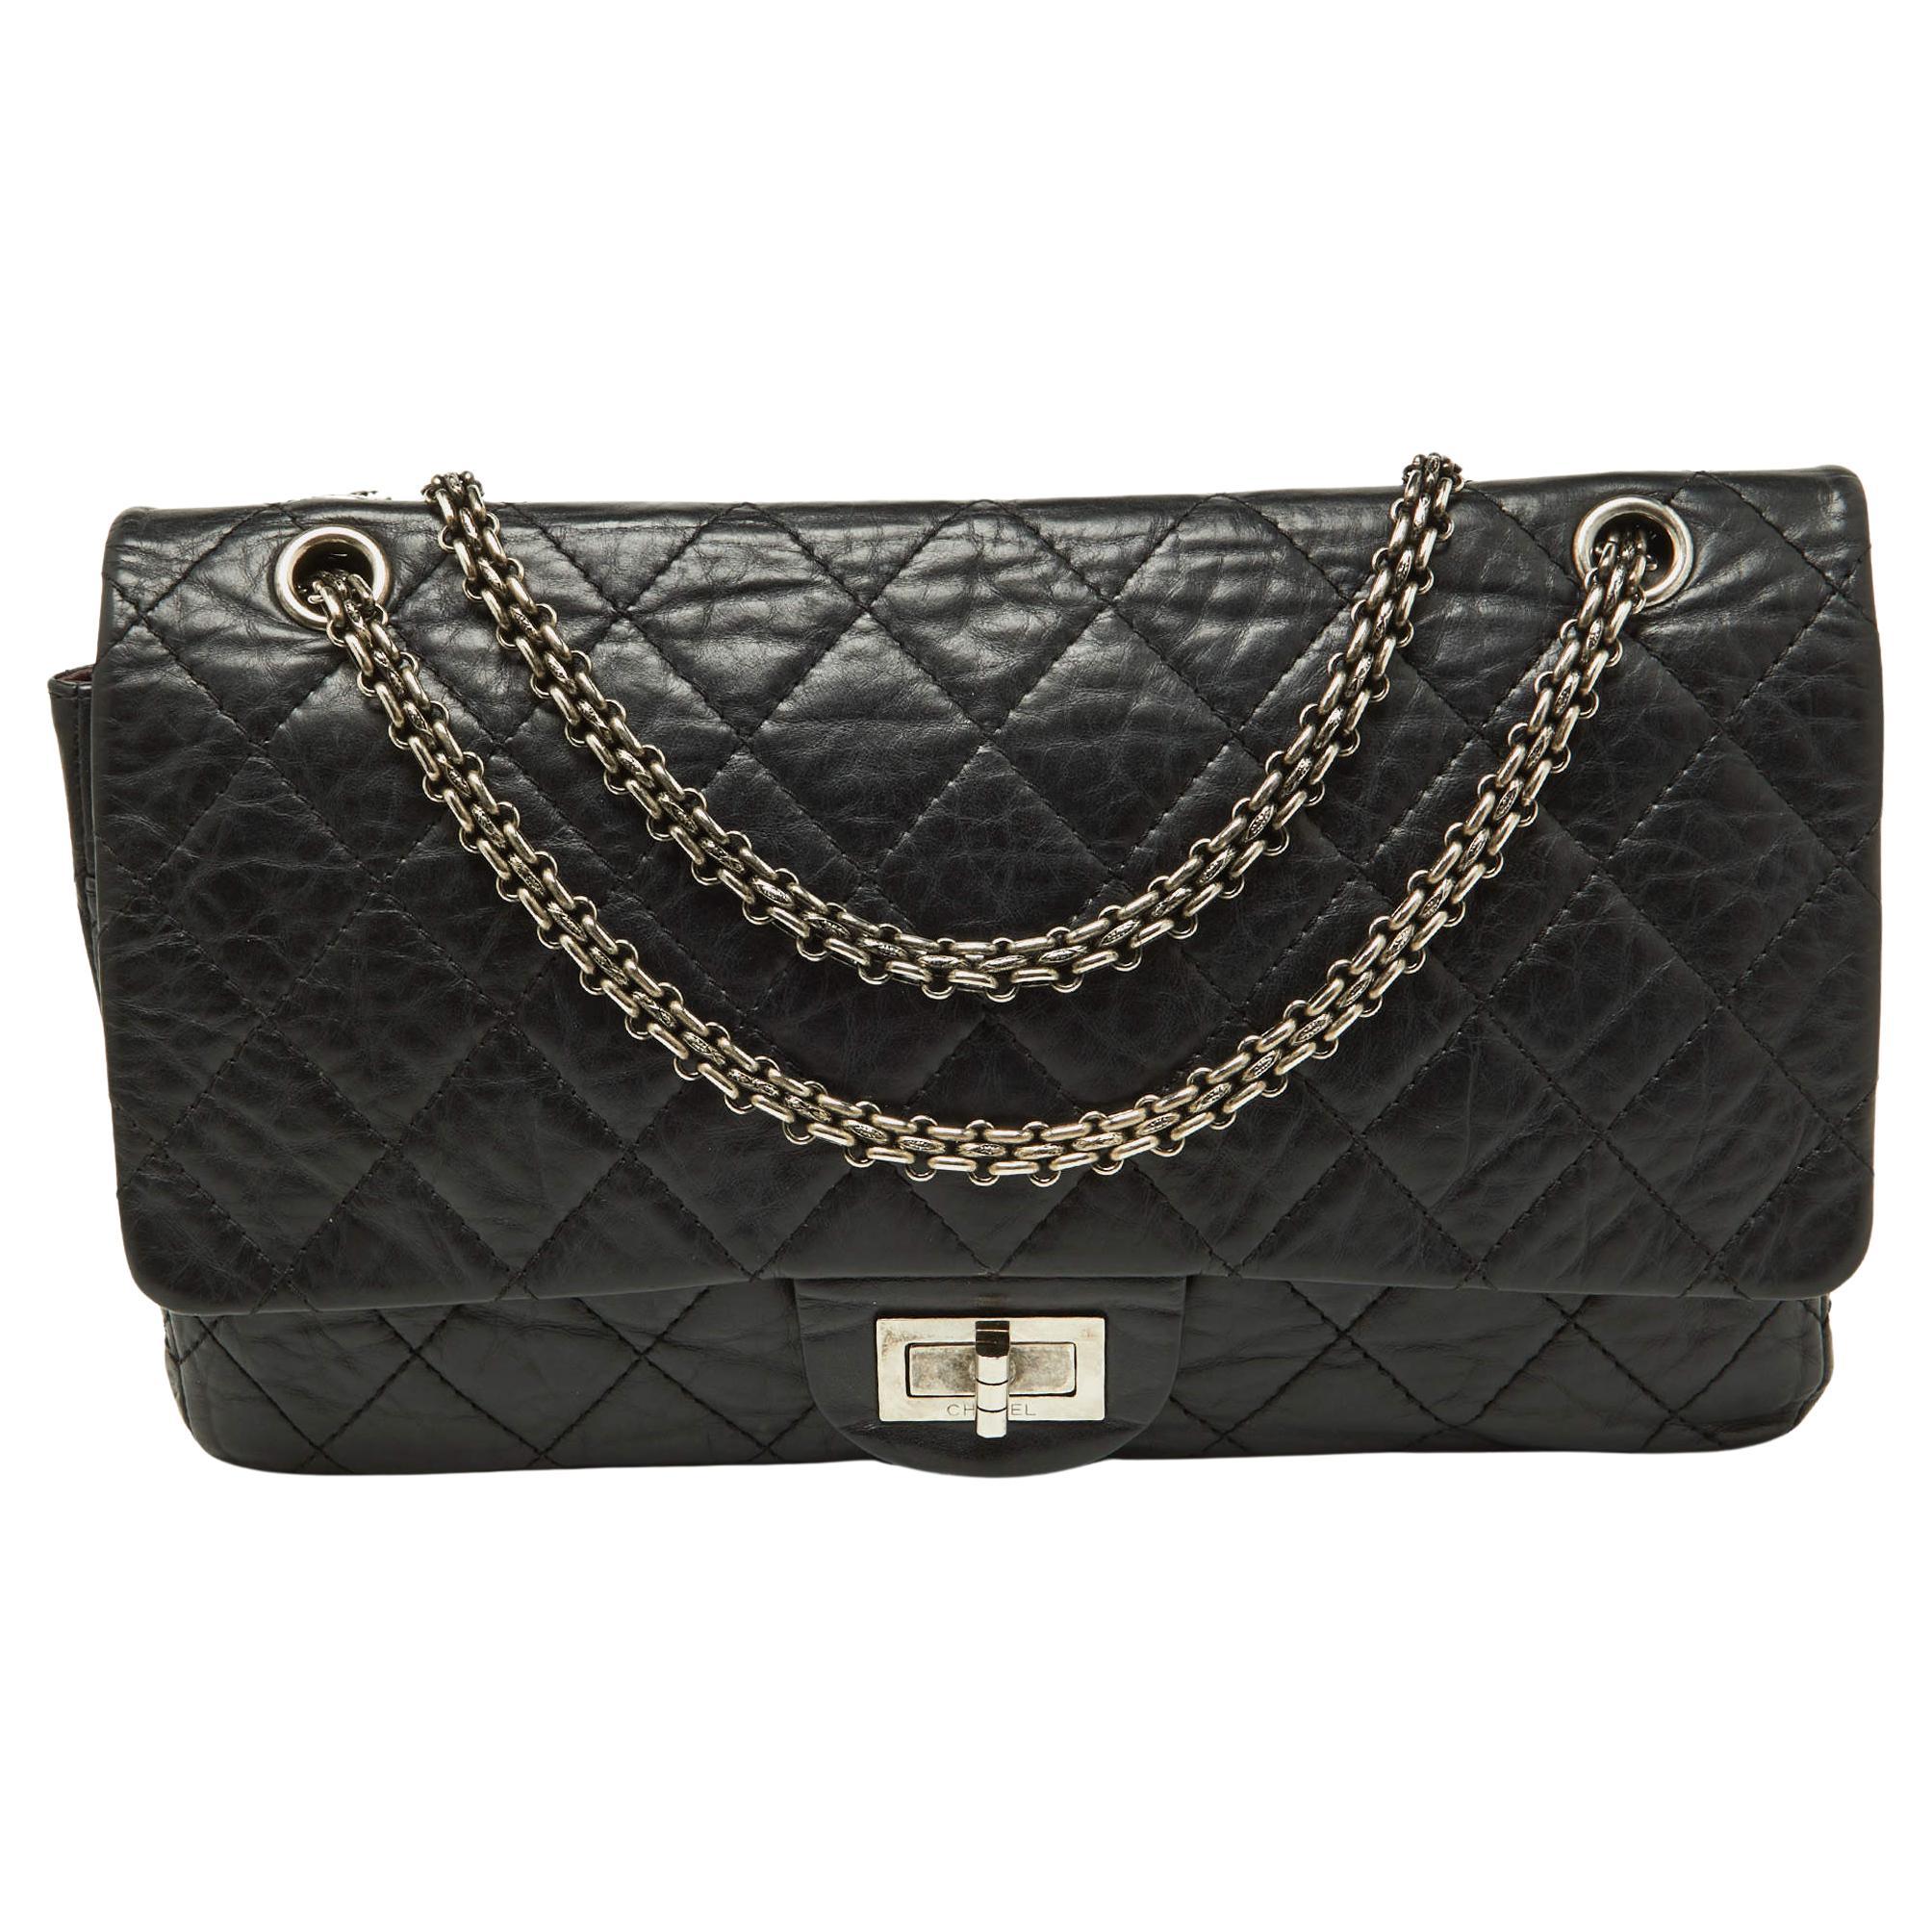 Chanel Black Quilted Aged Leather Reissue 2.55 Classic 227 Flap Bag For Sale